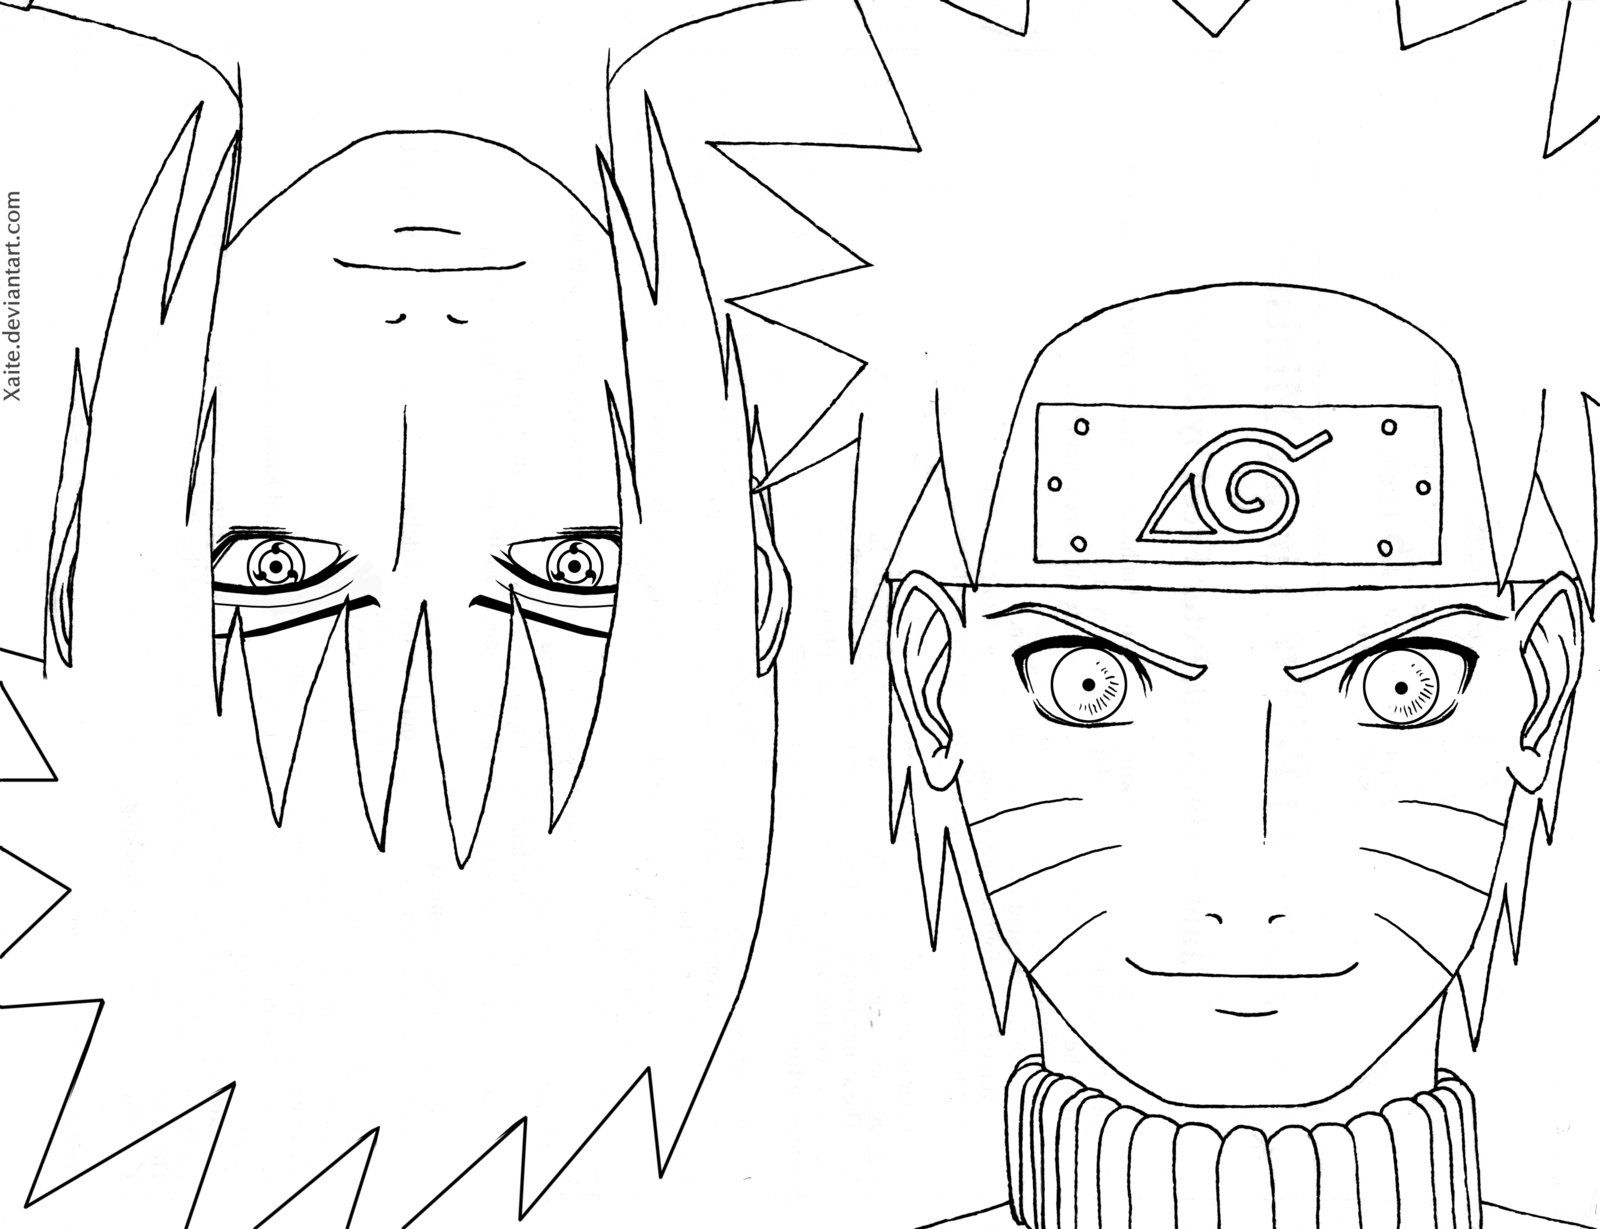 Naruto Shippuden Coloring Pages (19 Pictures) - Colorine.net | 4380